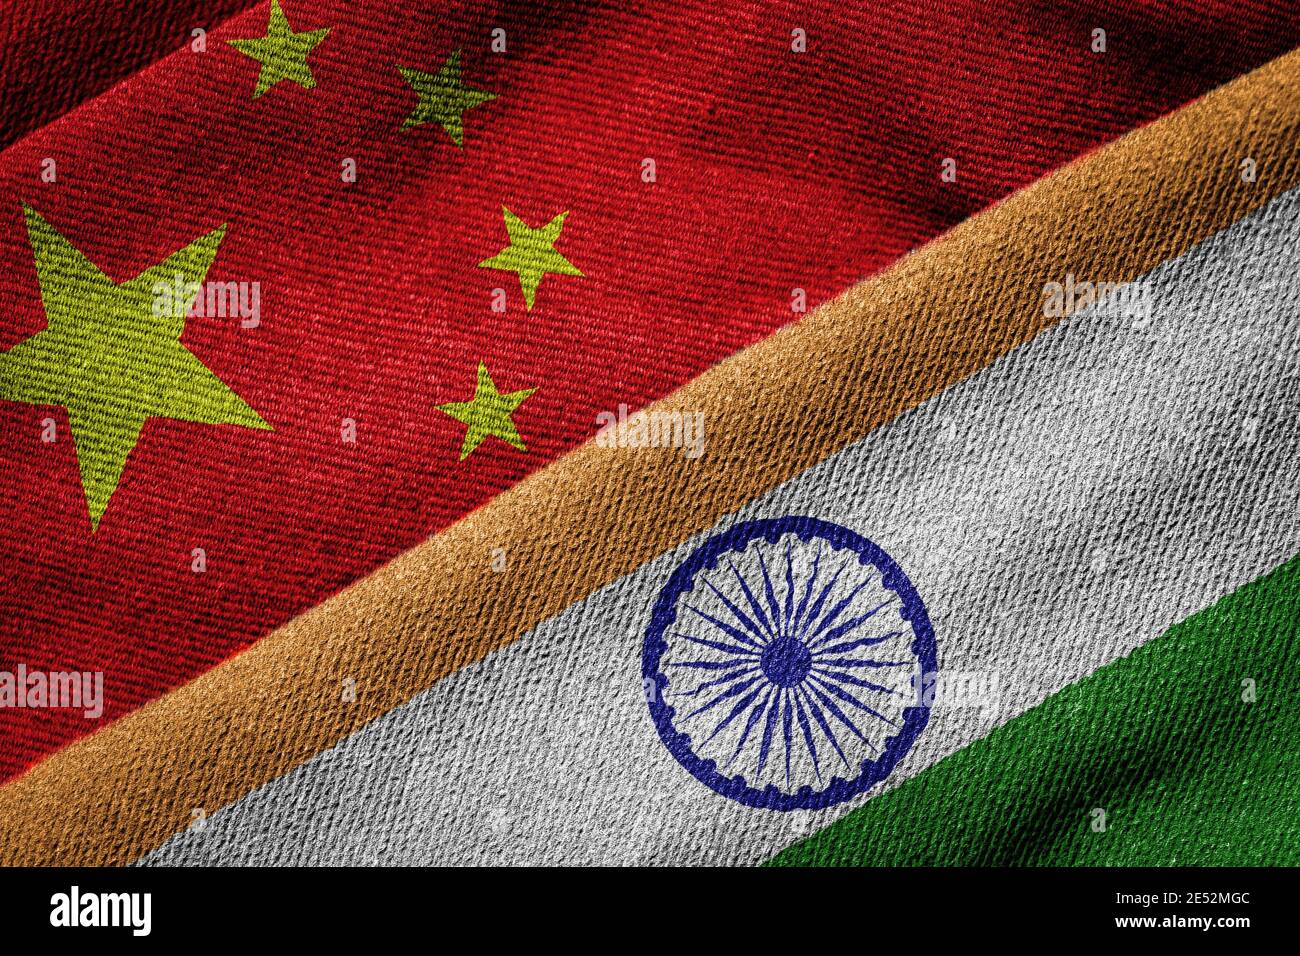 Overlapping grunge flags of India and China, concept of relations and ongoing political tension between the two countries. Stock Photo